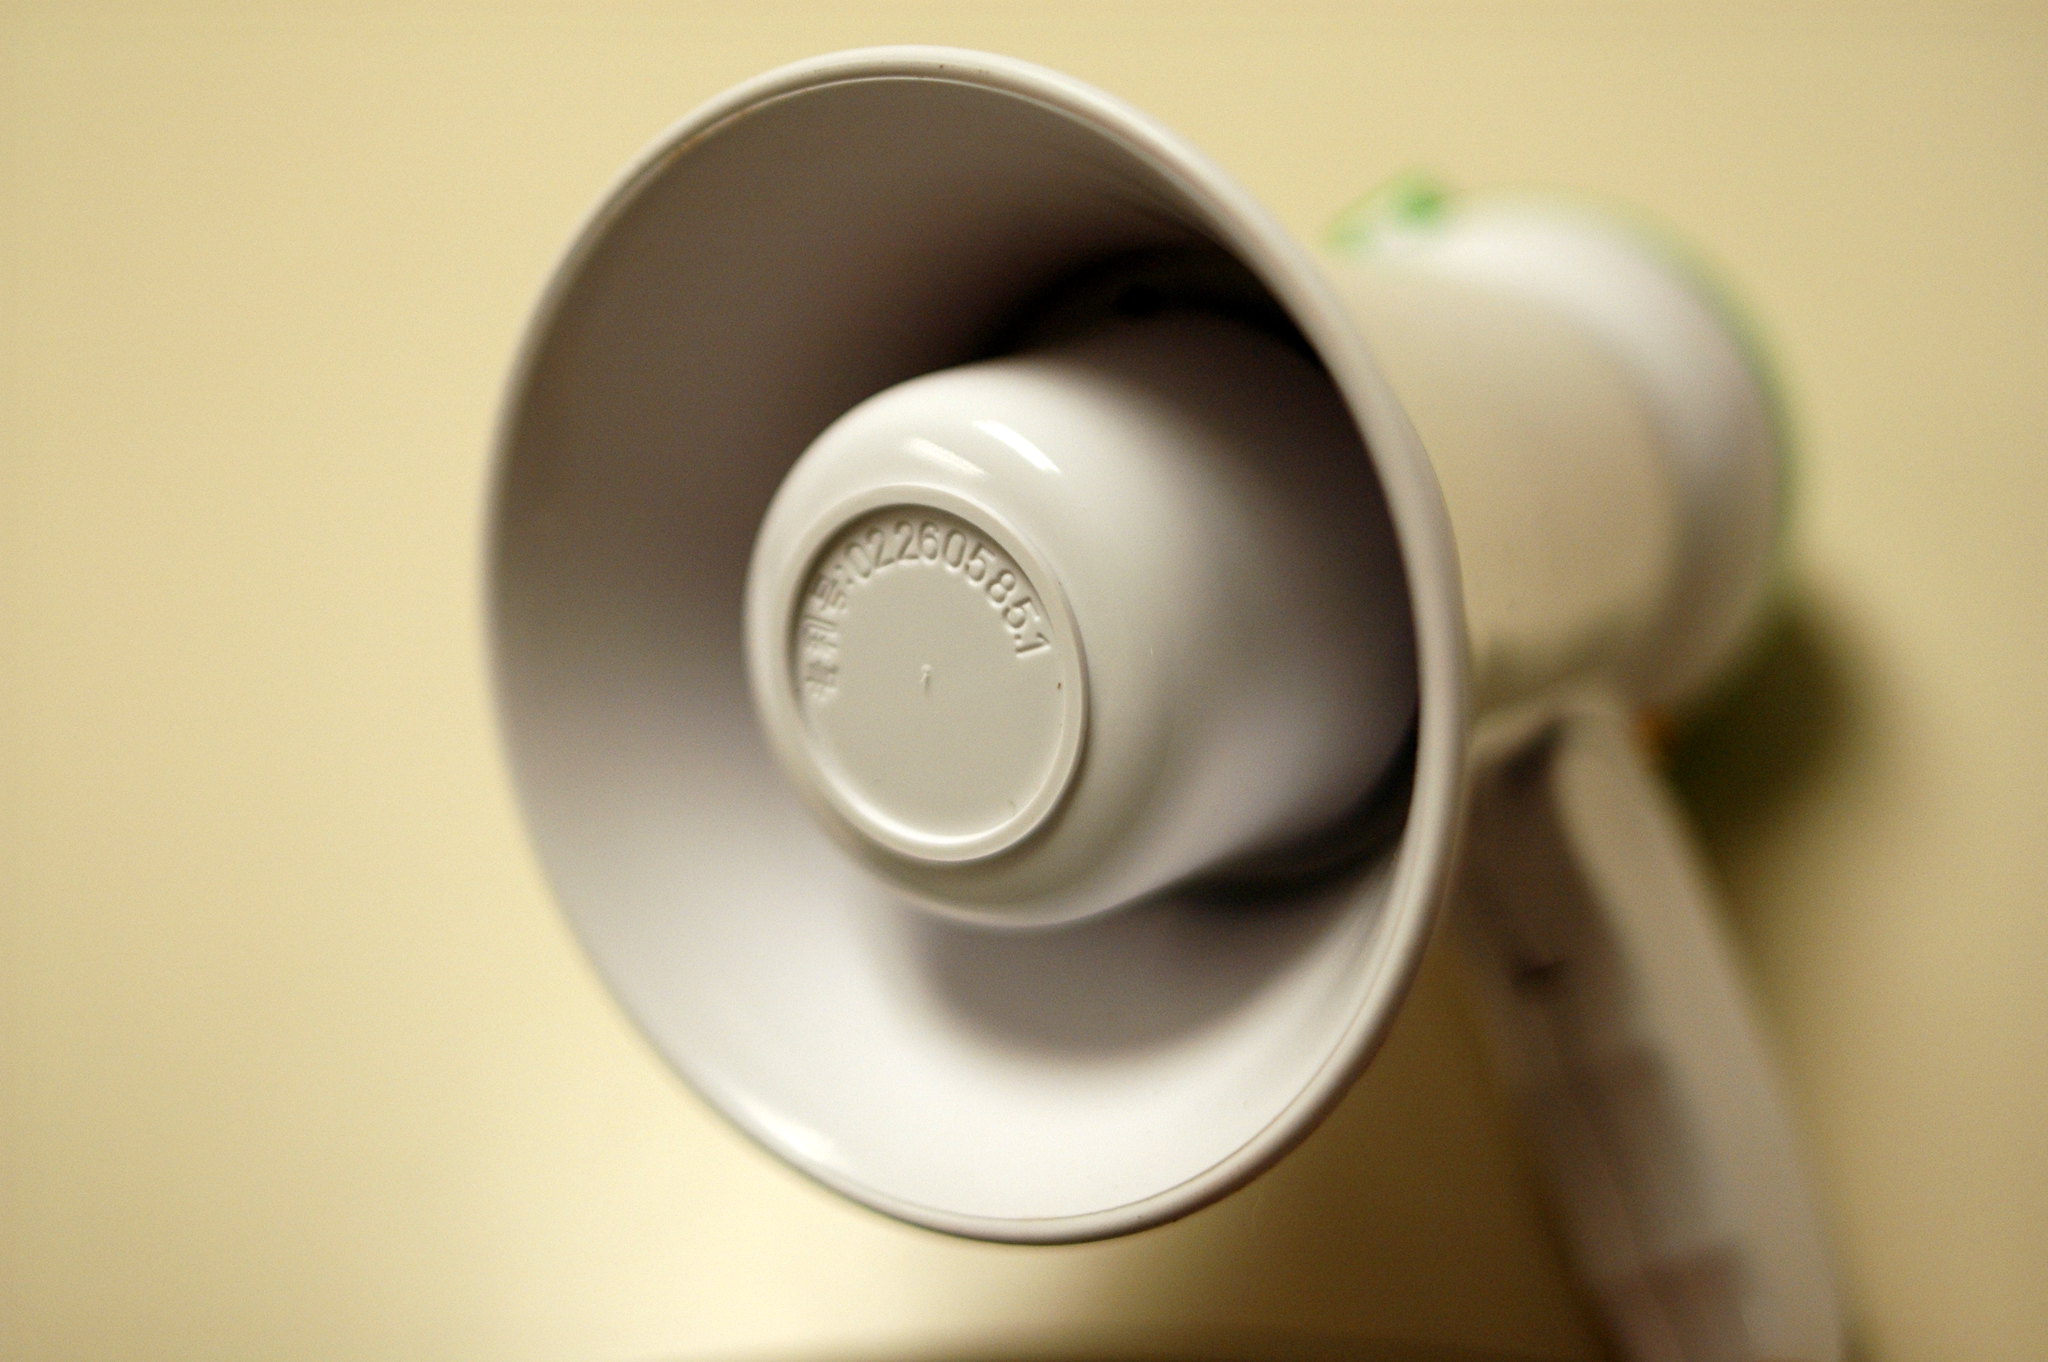 Recent Purchase: Megaphone by LarimdaME, licensed under CC BY-NC 2.0